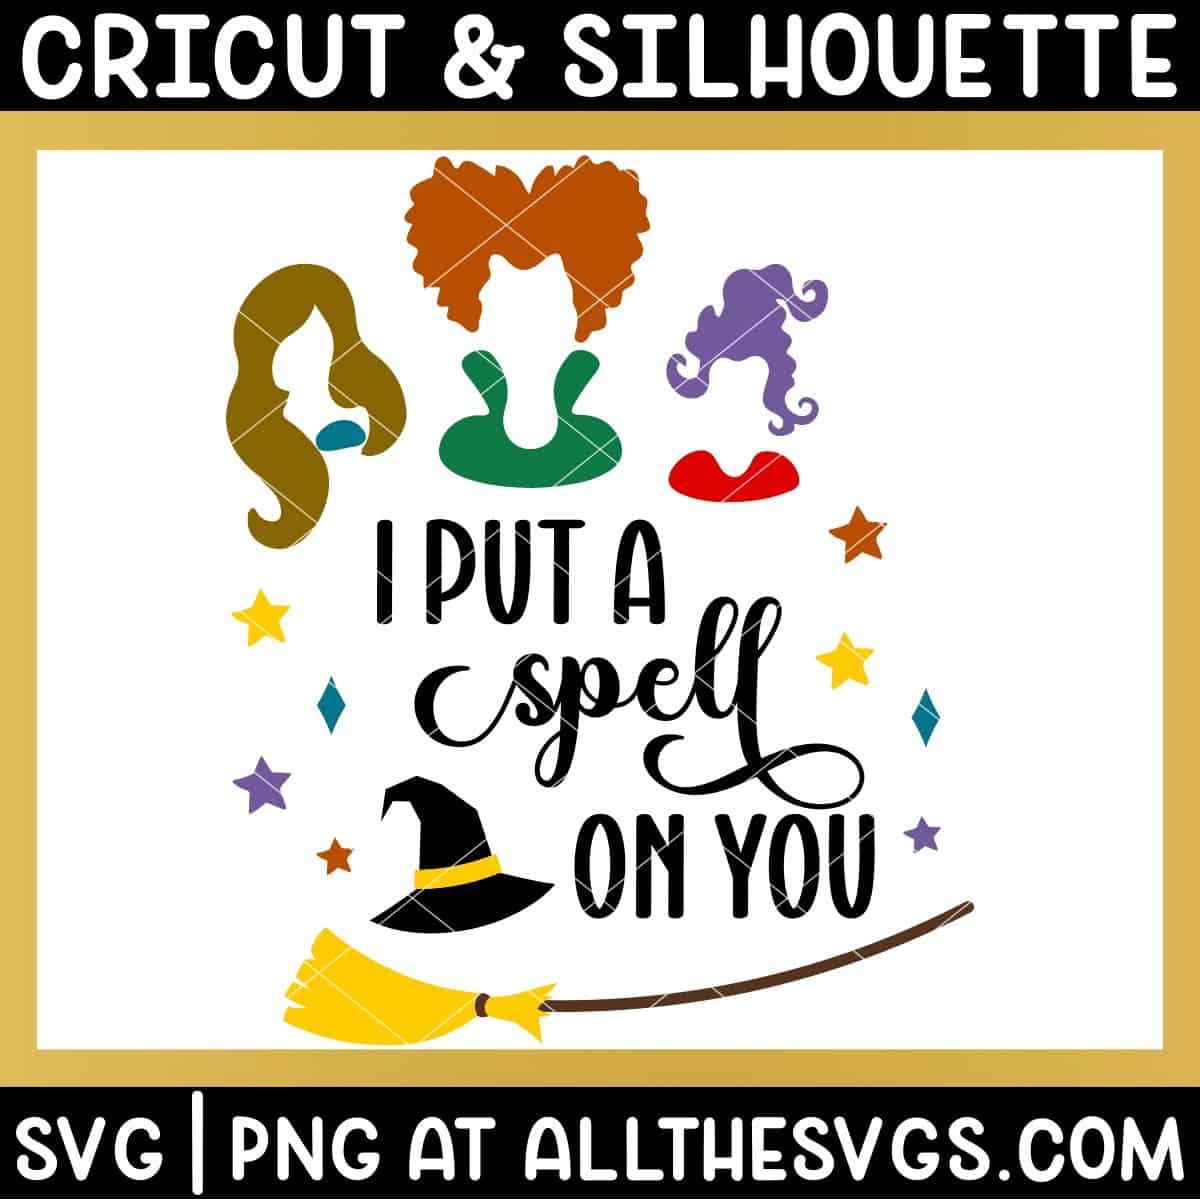 halloween hocus pocus i put a spell on you sanderson sisters with witch hat, broom, and stars svg file.